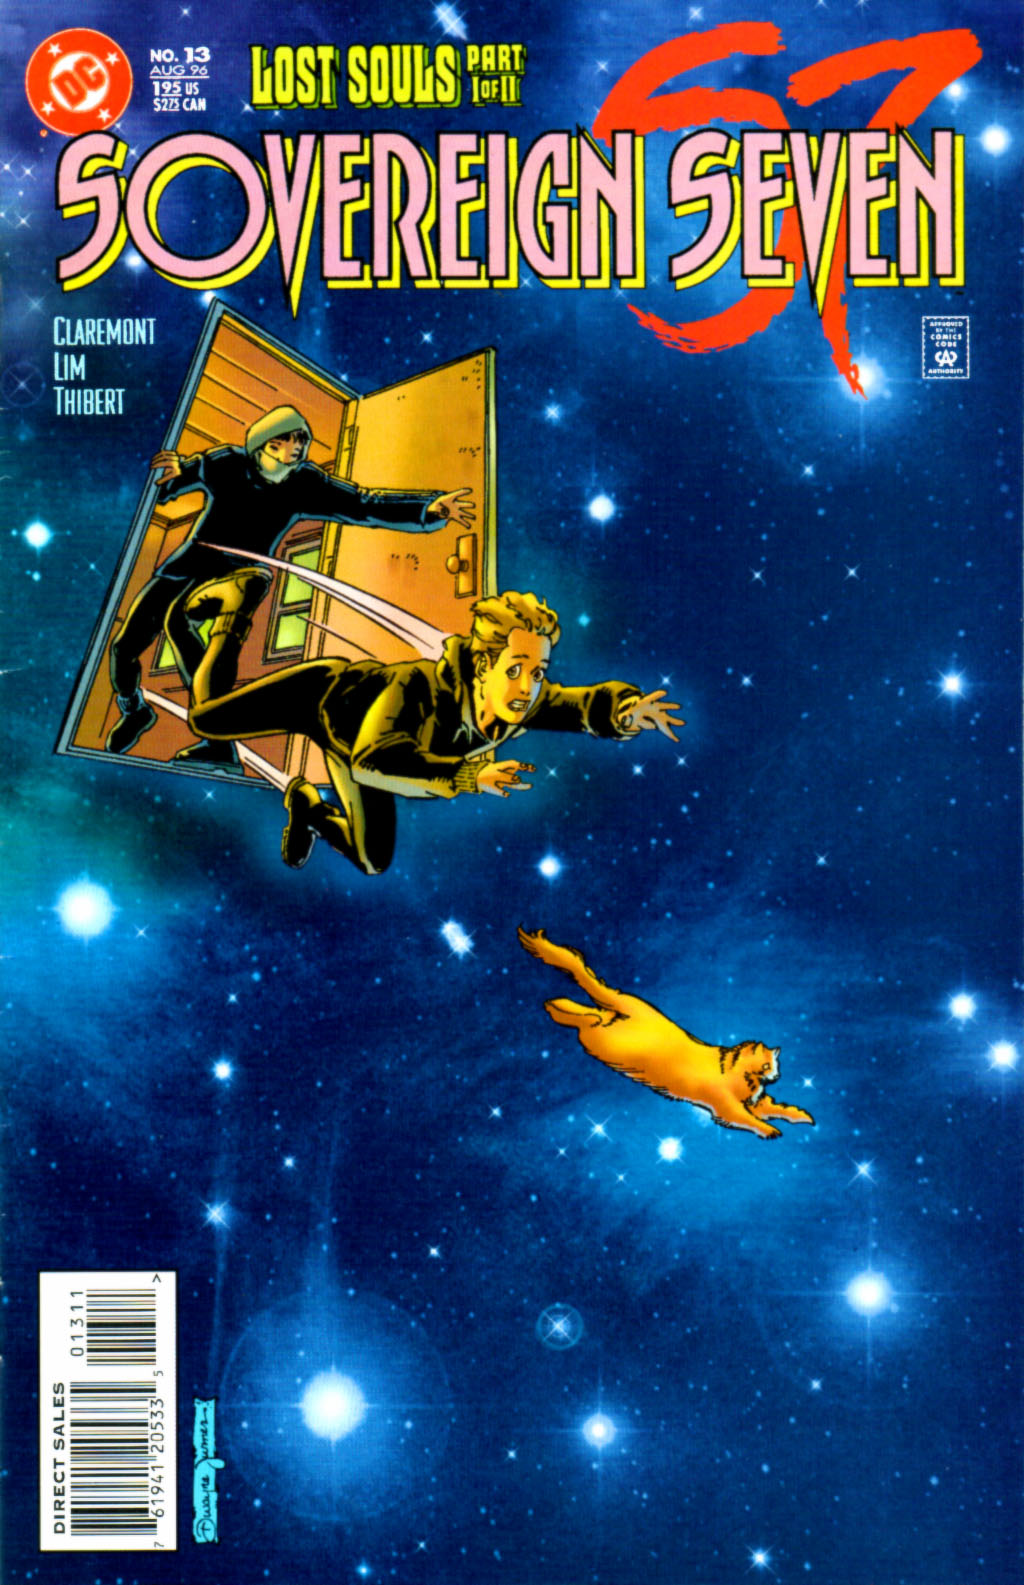 Read online Sovereign Seven comic -  Issue #13 - 2